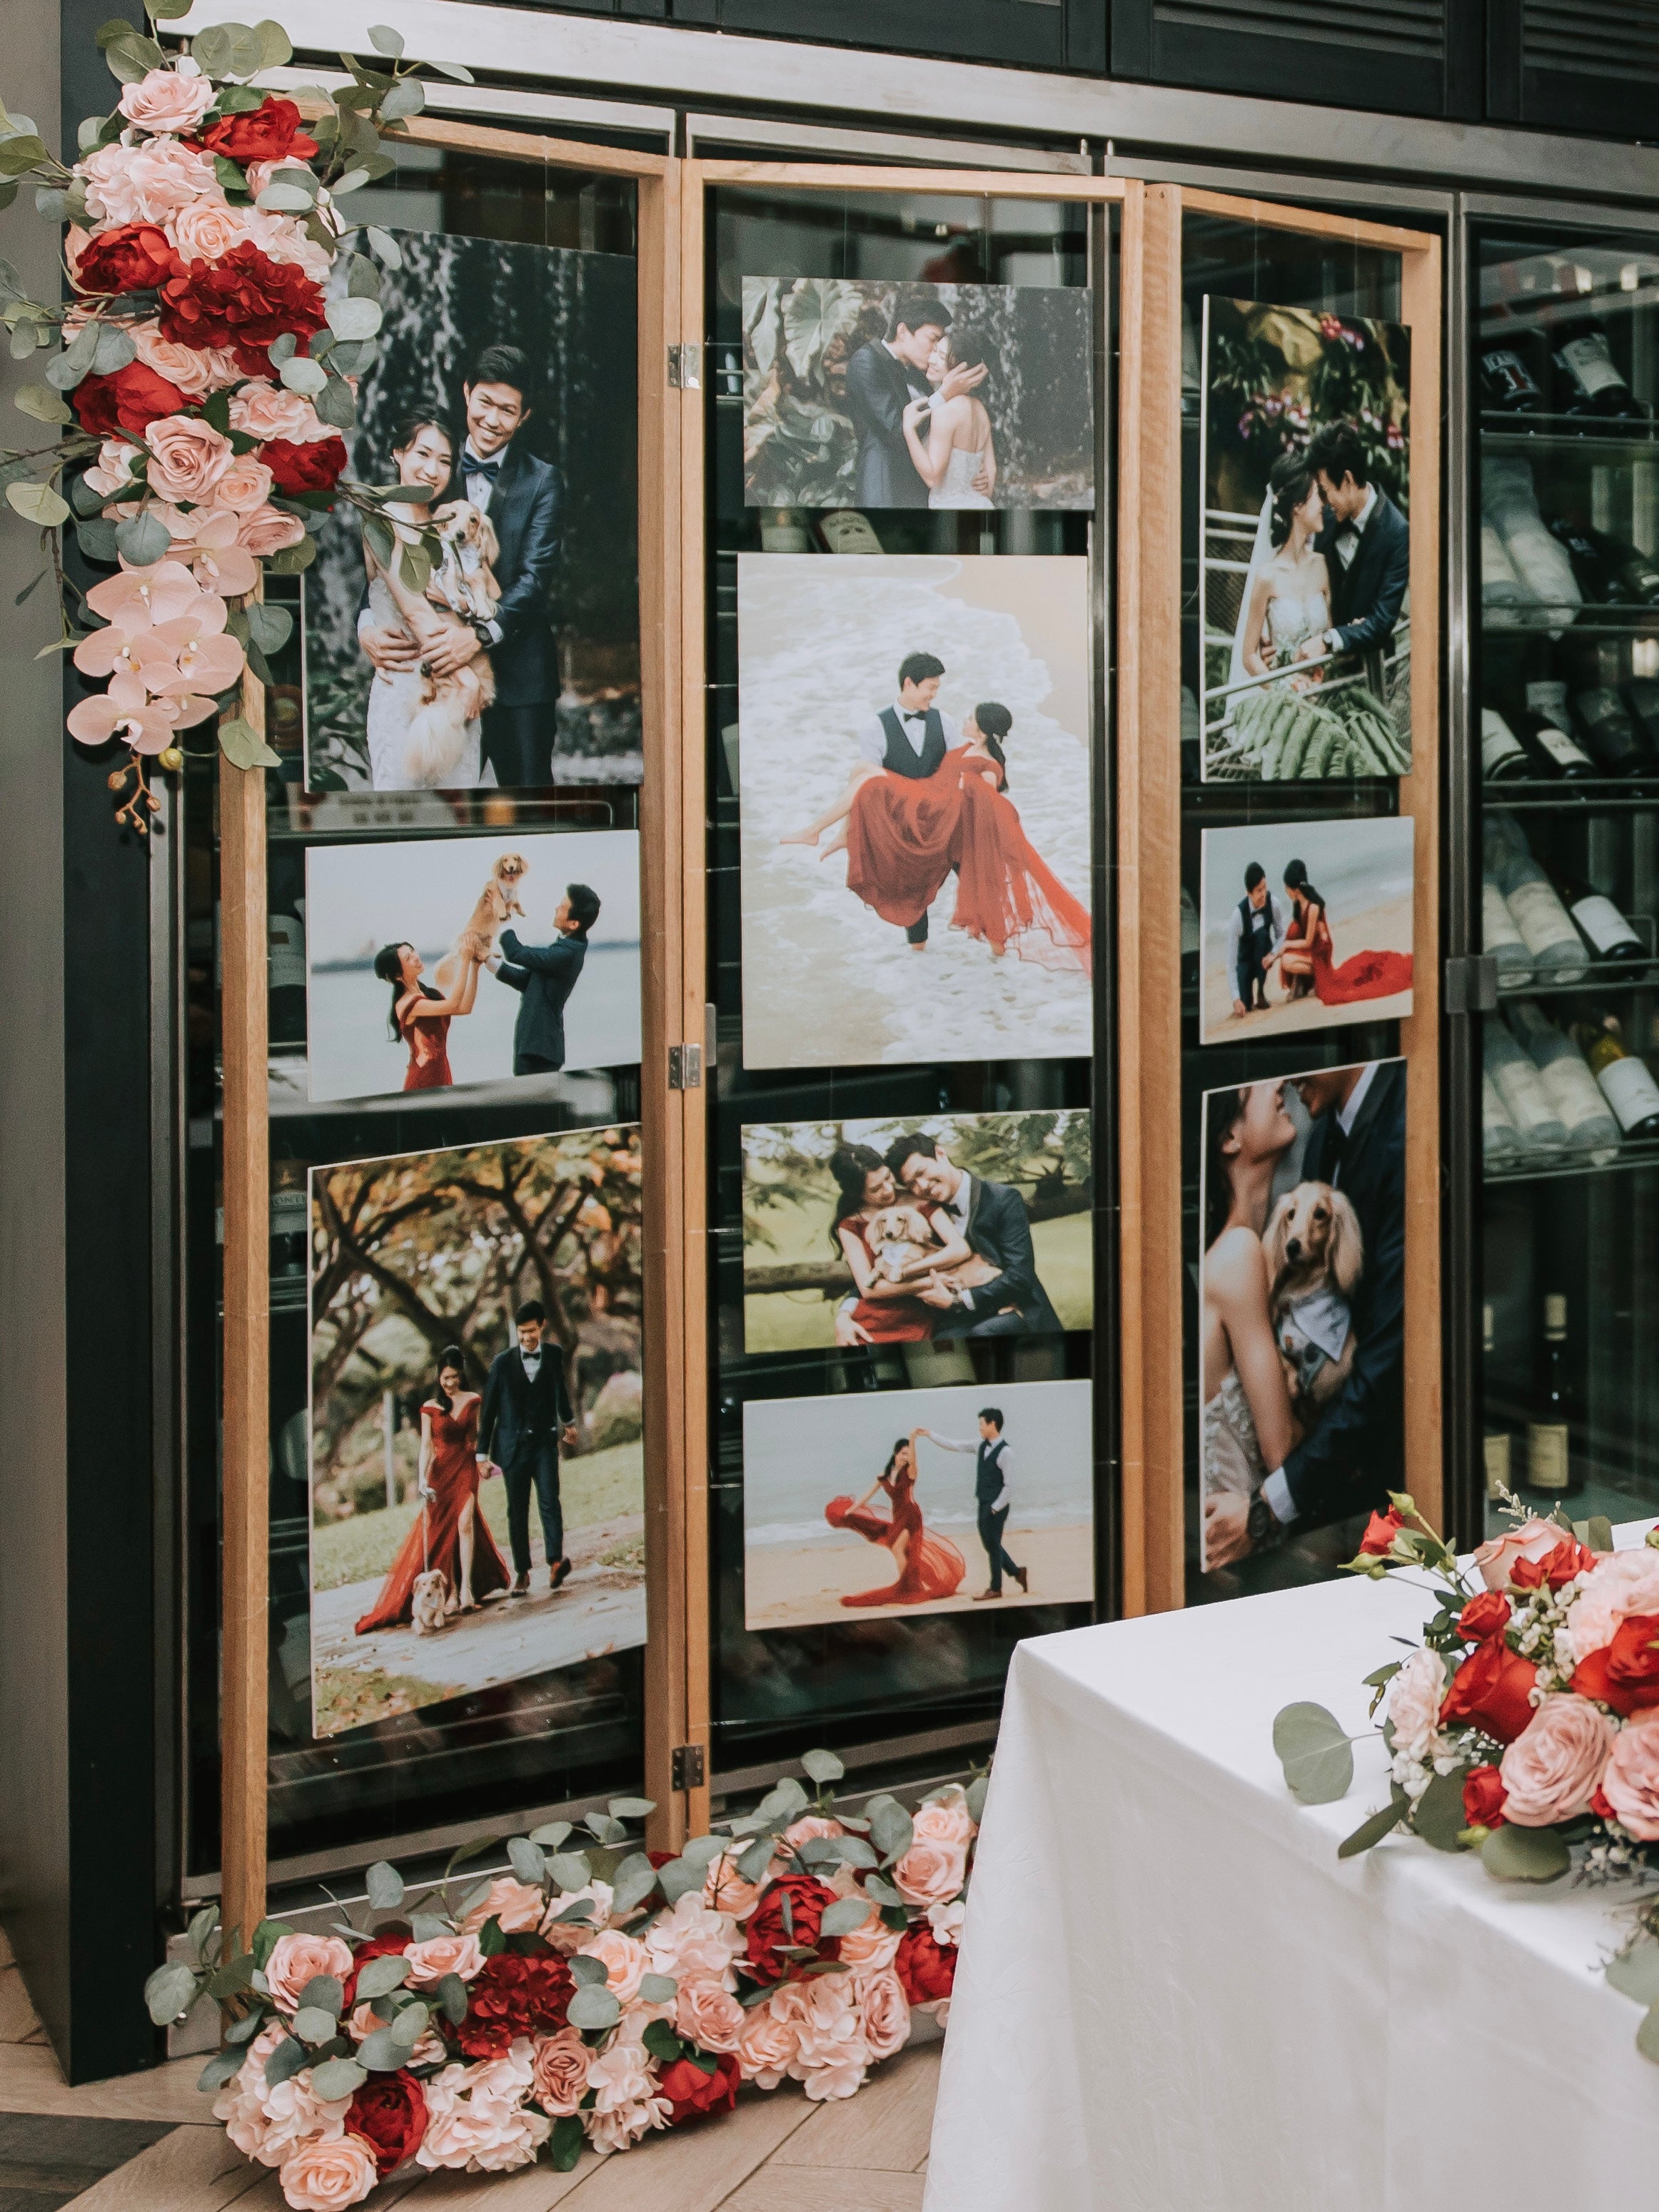 Affordable Wedding Reception Decor in Singapore - Rustic Photo Gallery with Red & Pink Florals (Venue: Botanico)